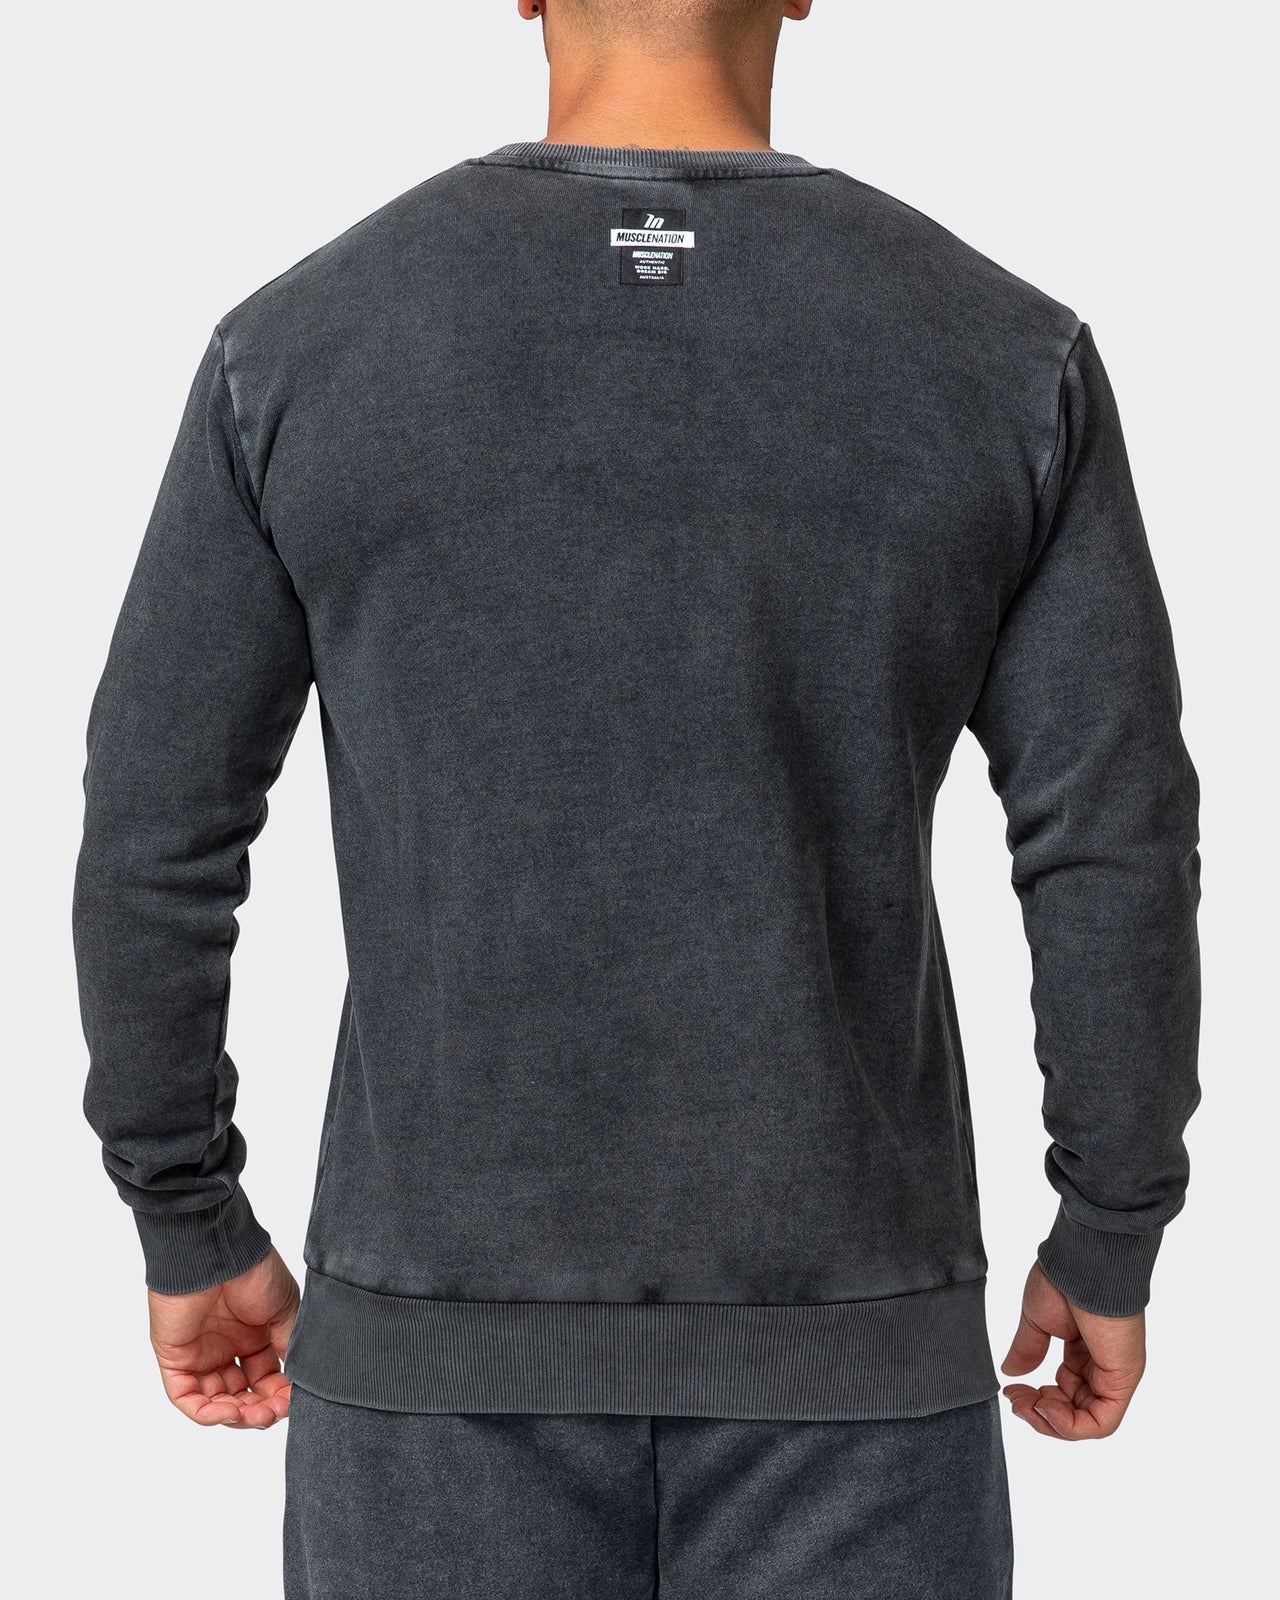 musclenation Mens Classic Vintage Pullover - Washed Black